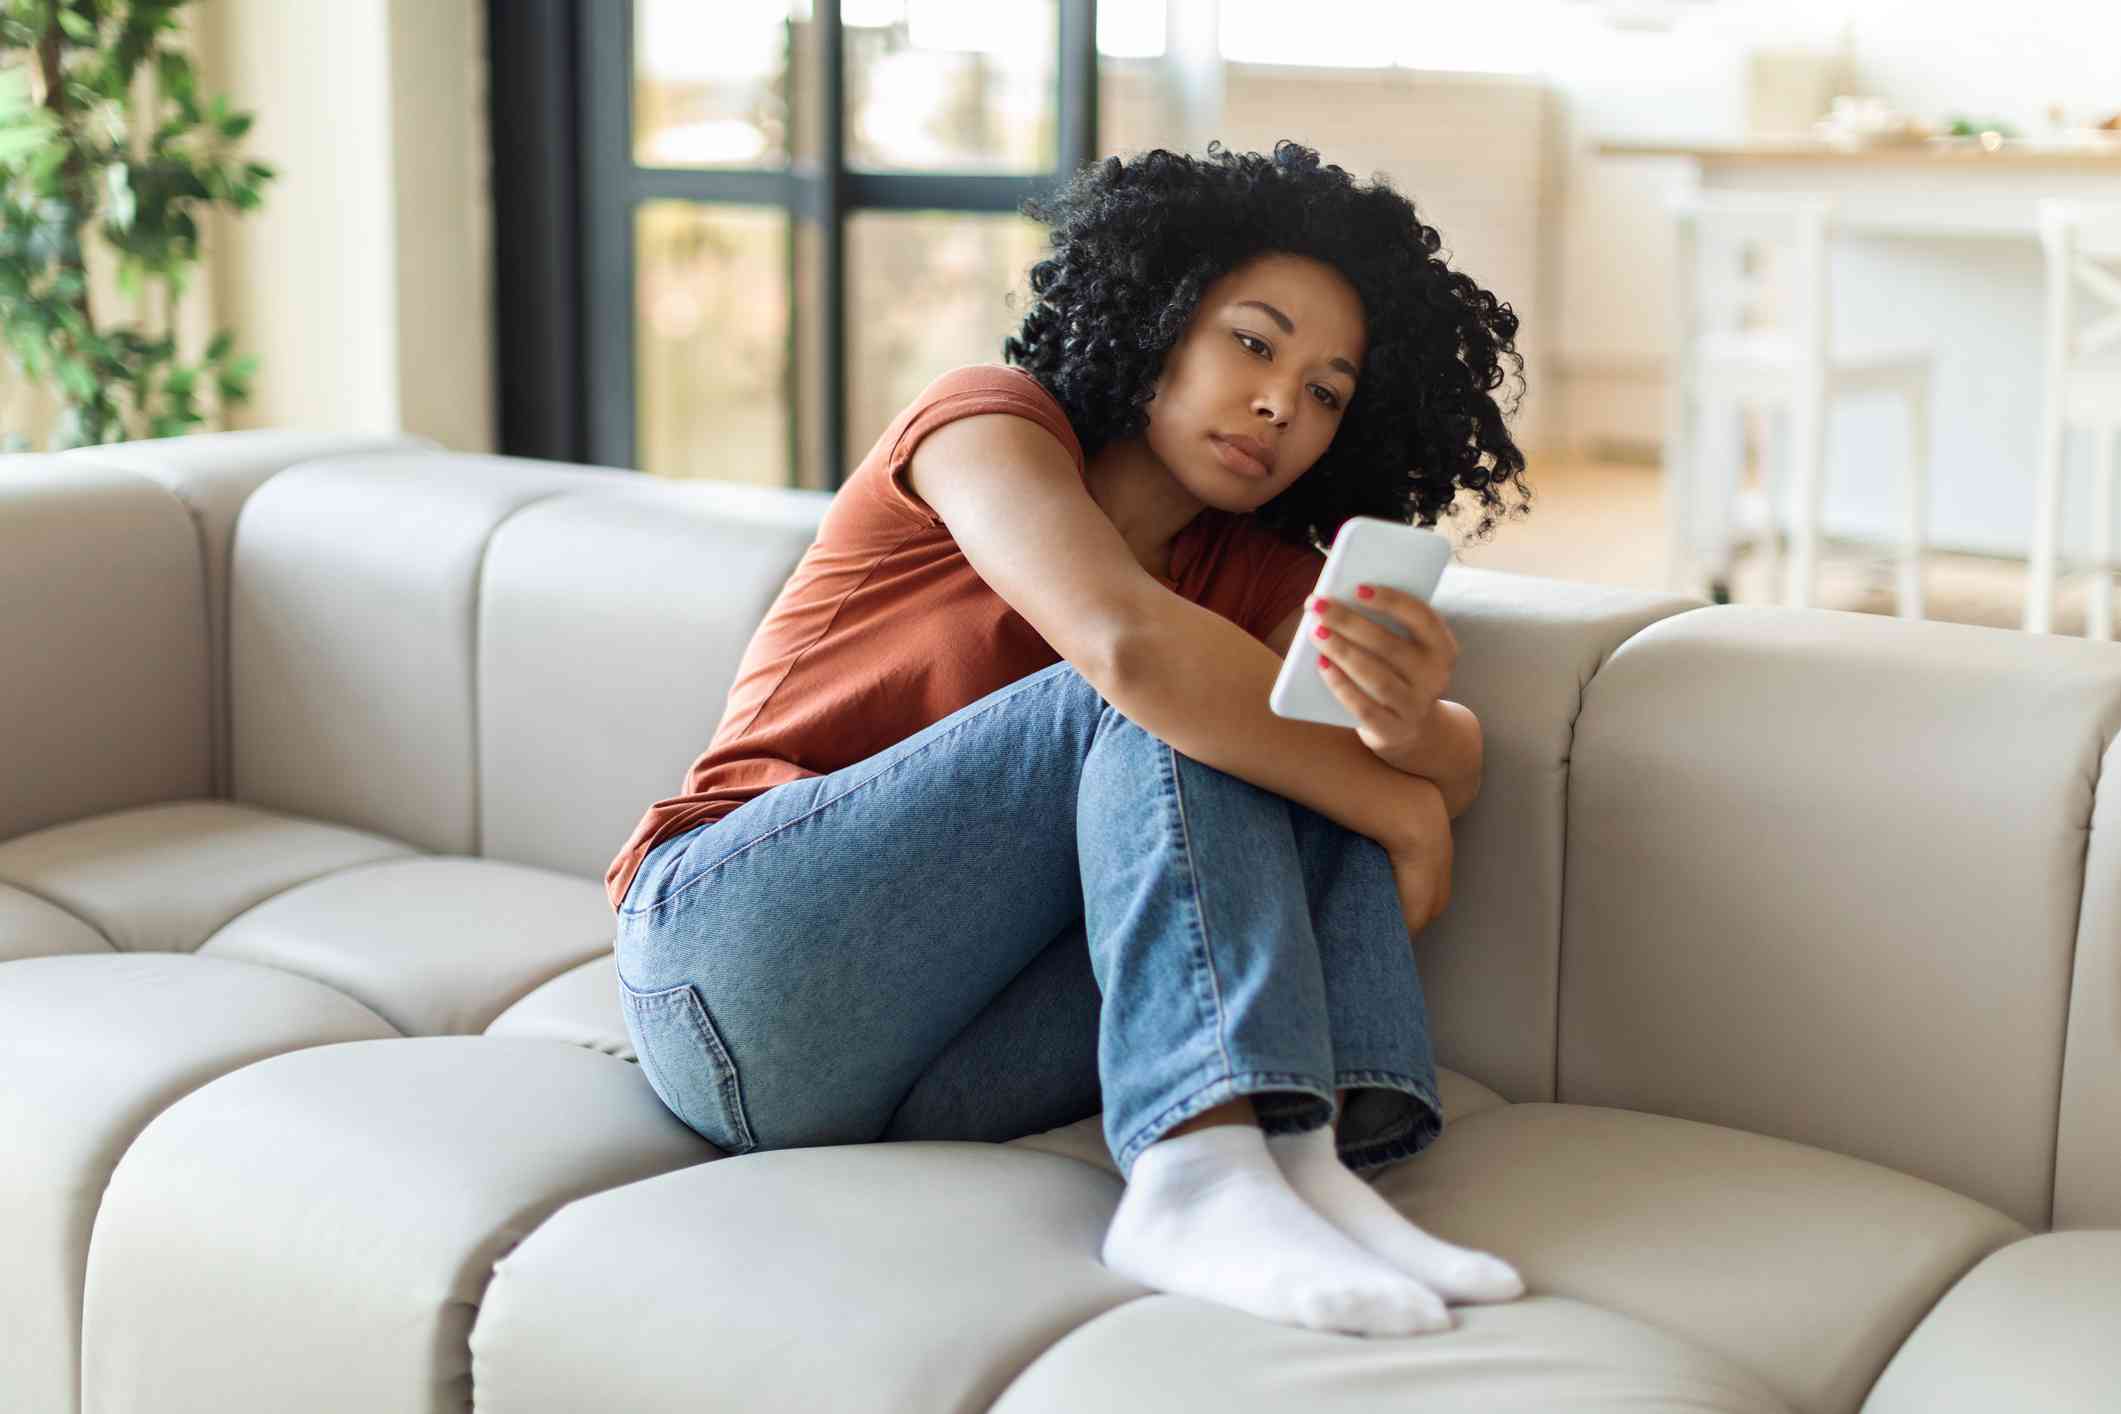 A woman in an orange shirt sits curled up on the couch while looking at the cellphone in her hand.